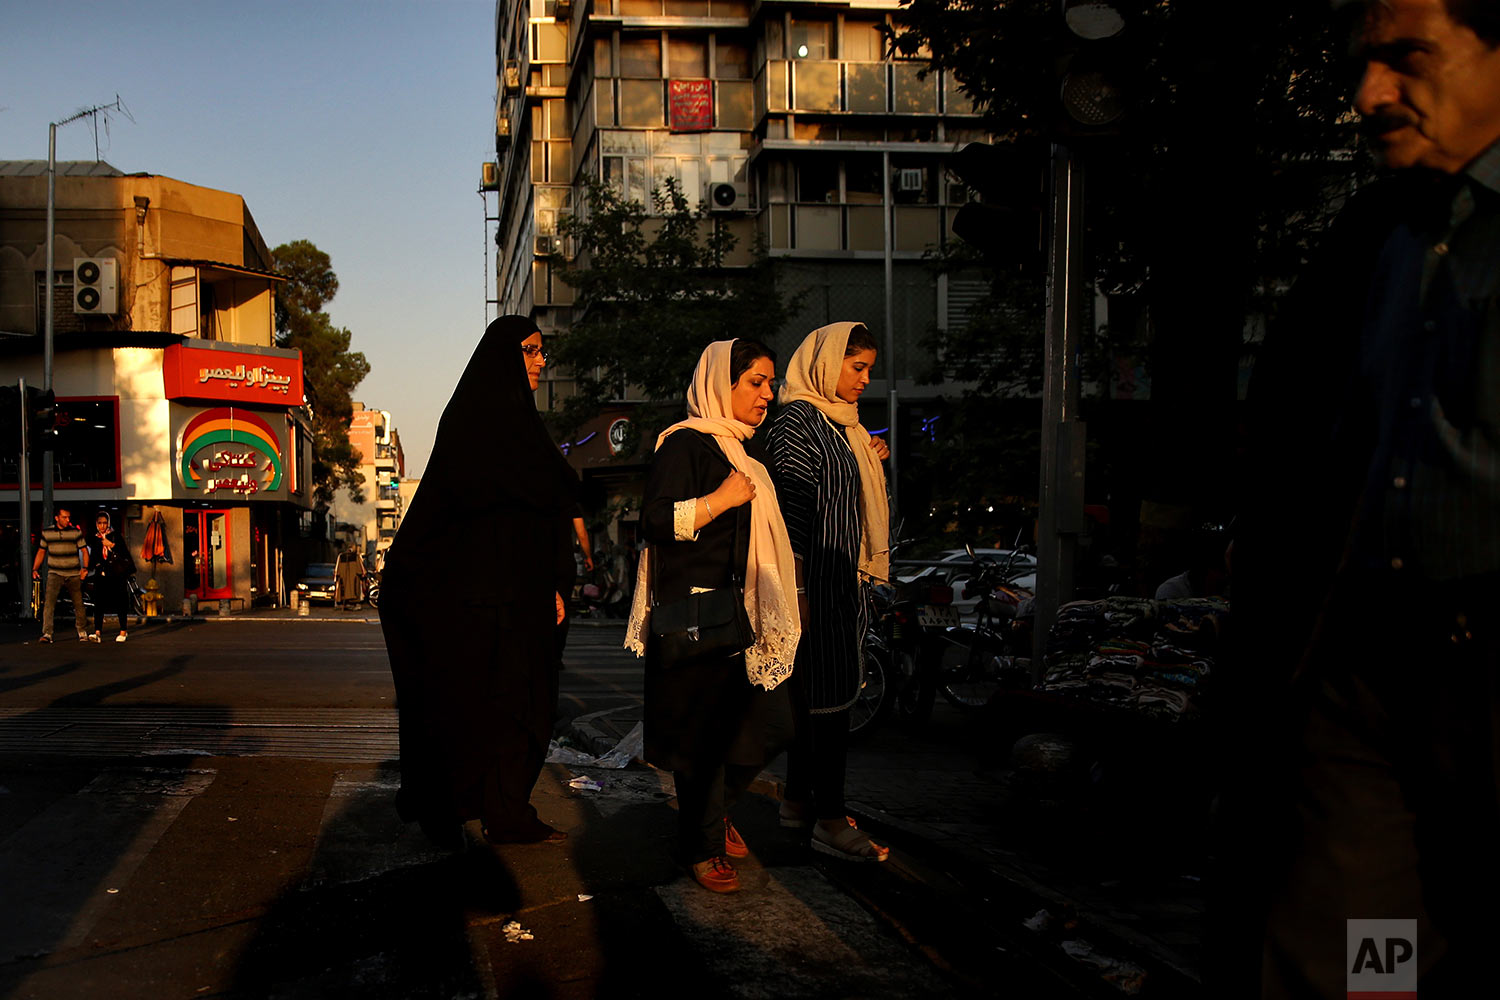  Iranian women cross a street while one of them wears the "chador" in downtown Tehran, Iran on Aug. 24, 2017. (AP Photo/Vahid Salemi) 